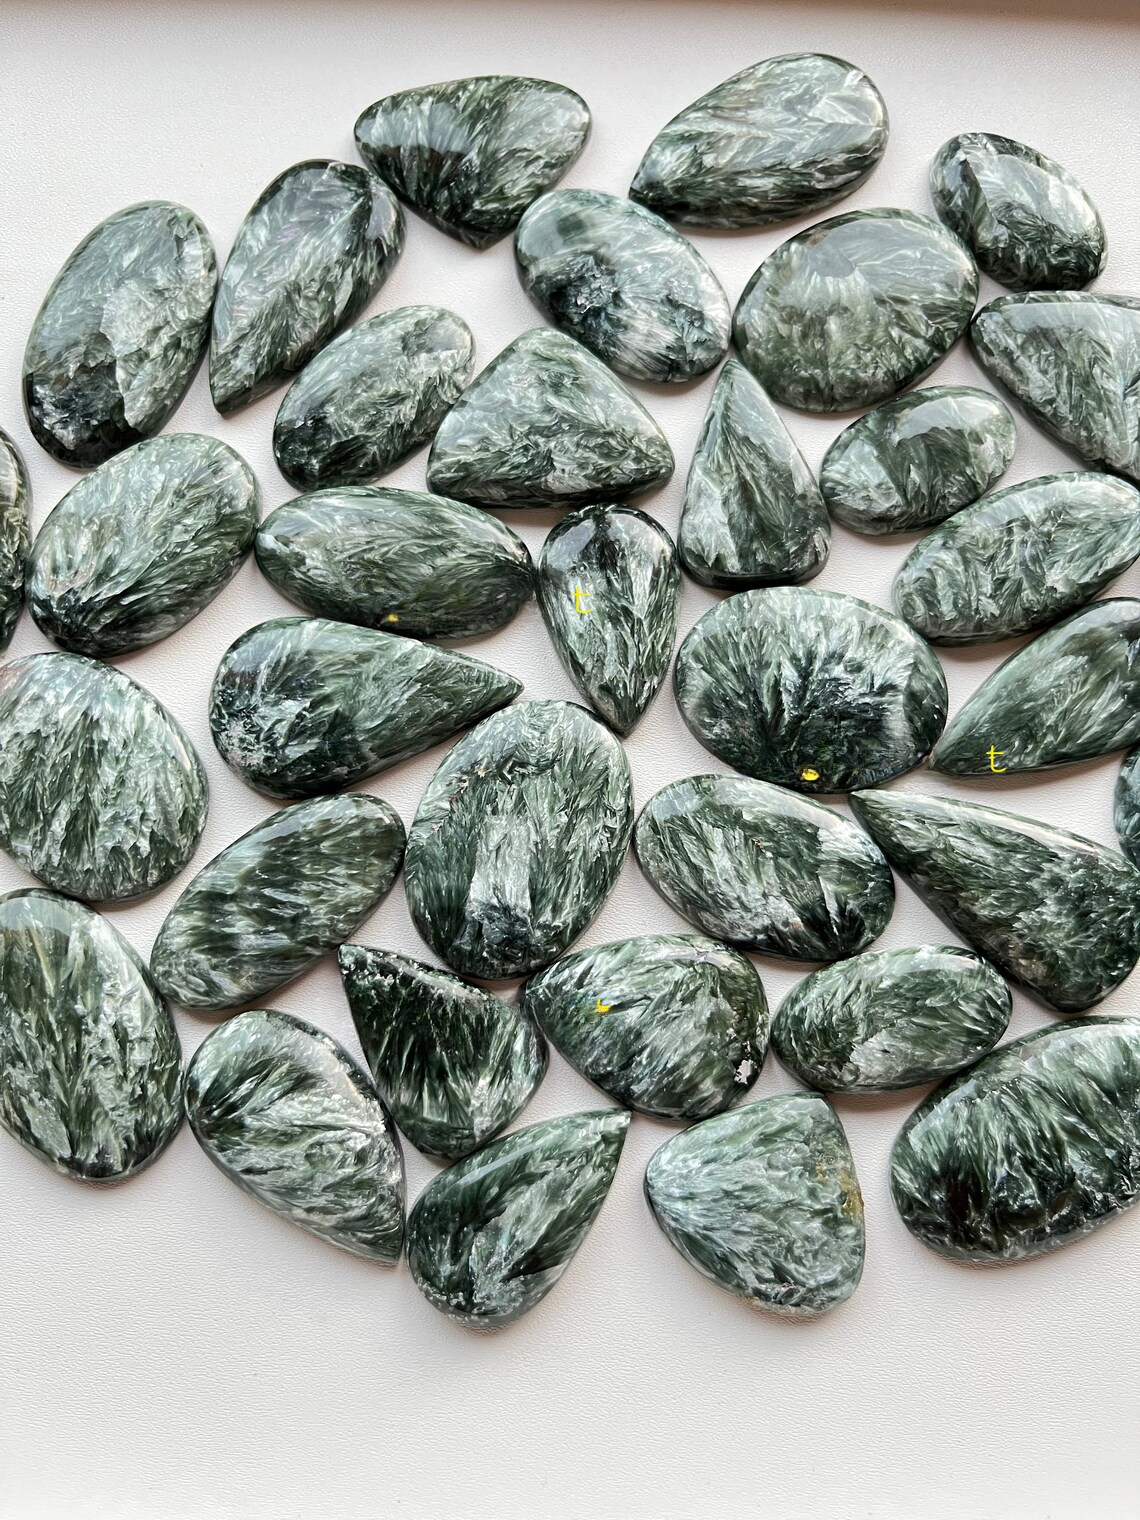 Top Quality SERAPHINITE Cabochon Wholesale Lot By Weight With Different Shapes And Sizes Used For Jewelry Making (Natural)